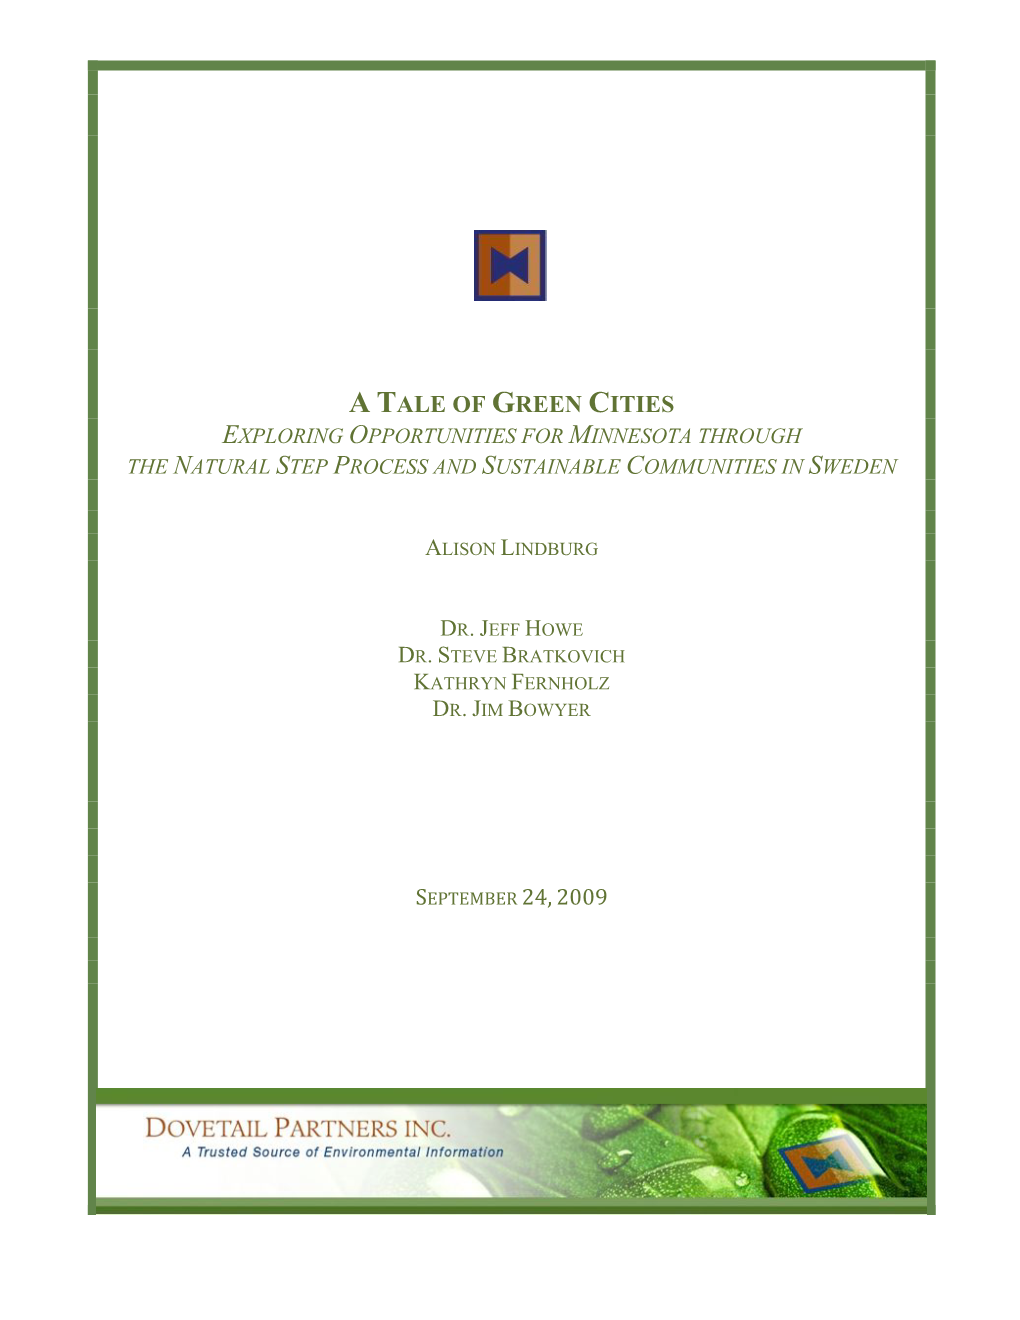 A Tale of Green Cities Exploring Opportunities for Minnesota Through the Natural Step Process and Sustainable Communities in Sweden